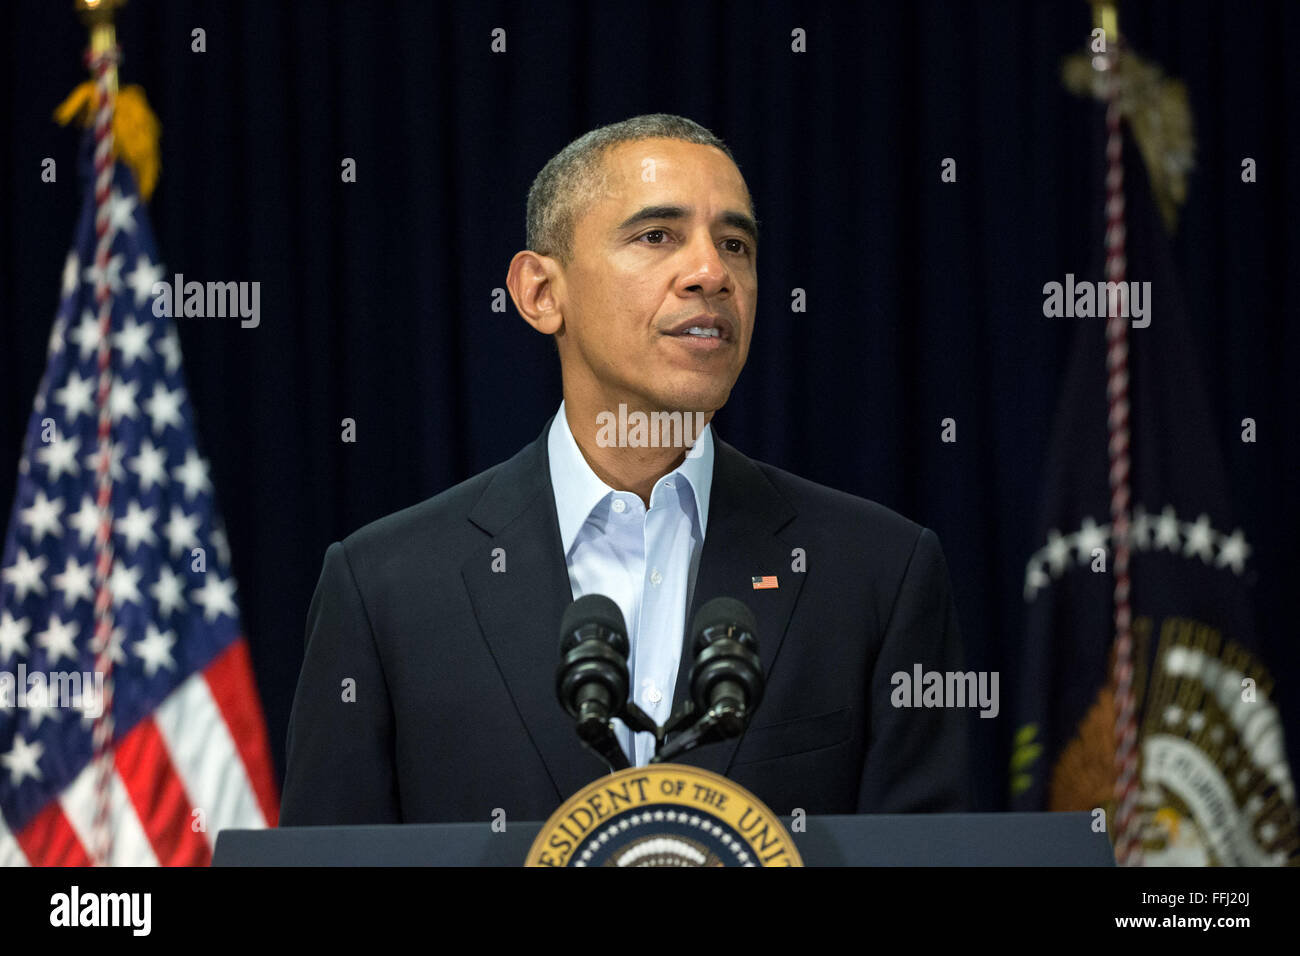 U.S. President Barack Obama makes a statement on the death of Supreme Court Justice Antonin Scalia at Omni Rancho Las Palmas February 13, 2016 in Rancho Mirage, California. Scalia, 79, was found dead Saturday morning at a private residence in the Big Bend area of West Texas. Stock Photo